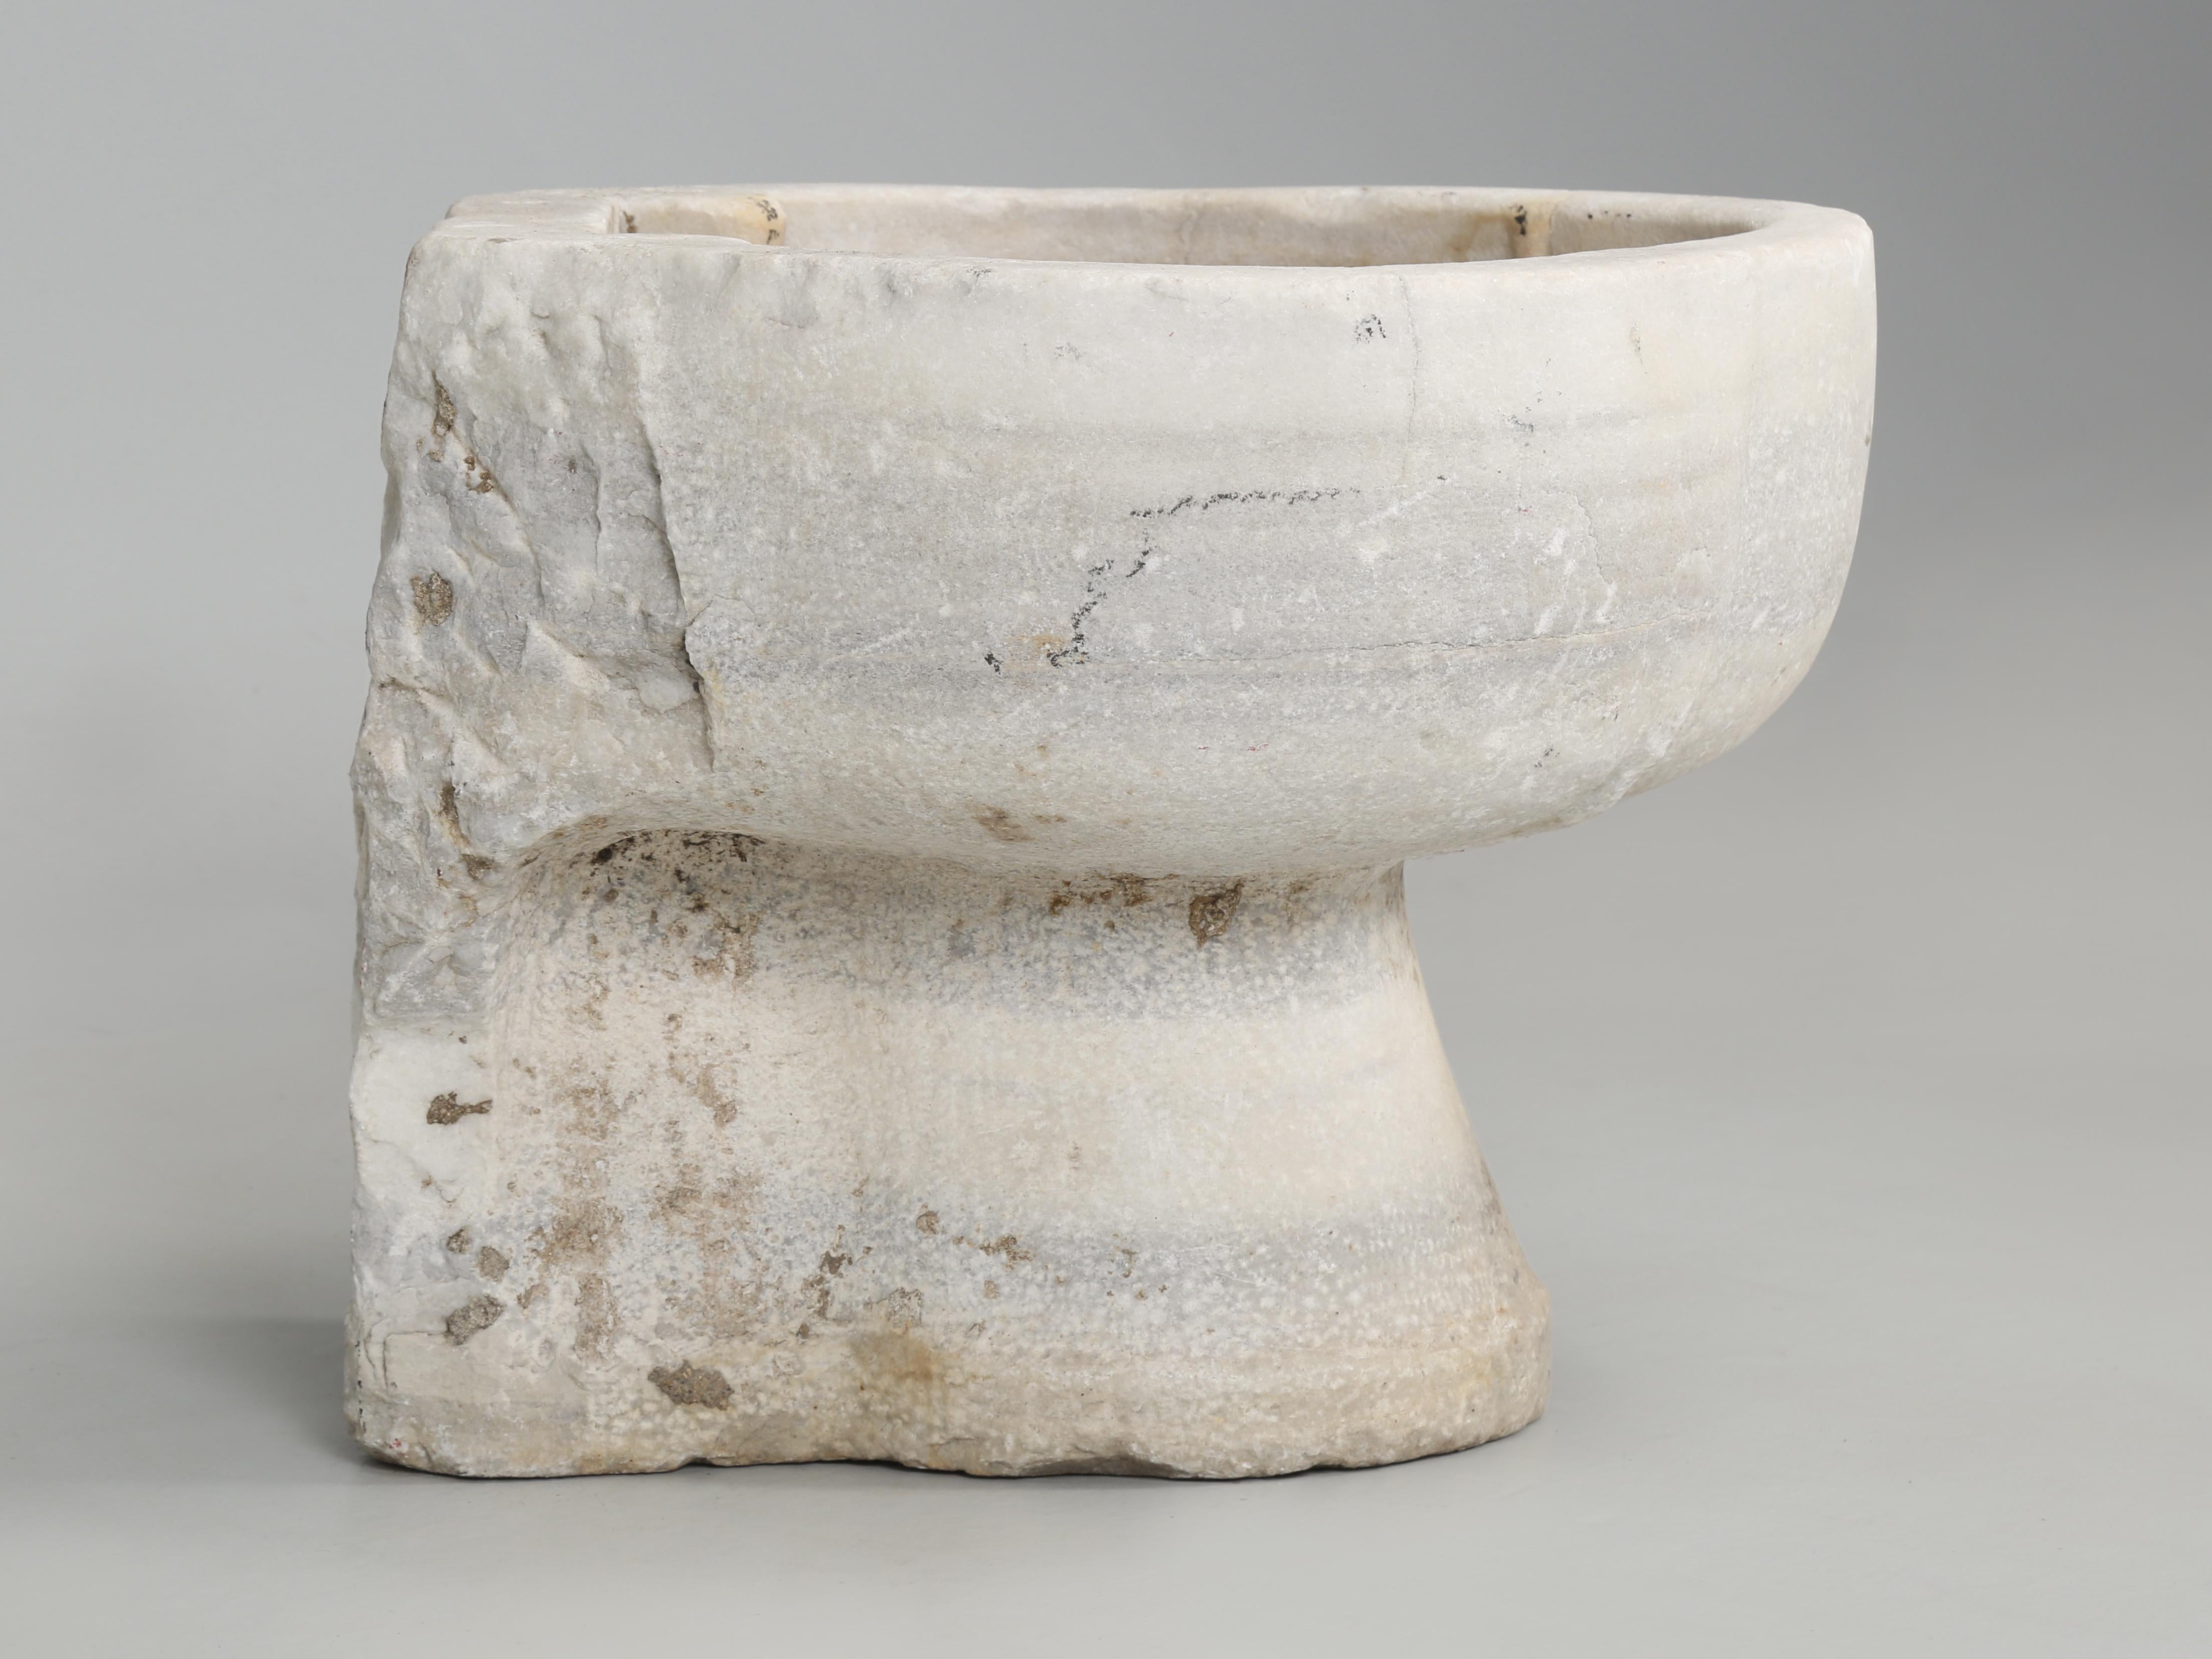 Italian Antique Carved Solid Block of Marble Wash Basin, Sink From Mediterranean Region For Sale